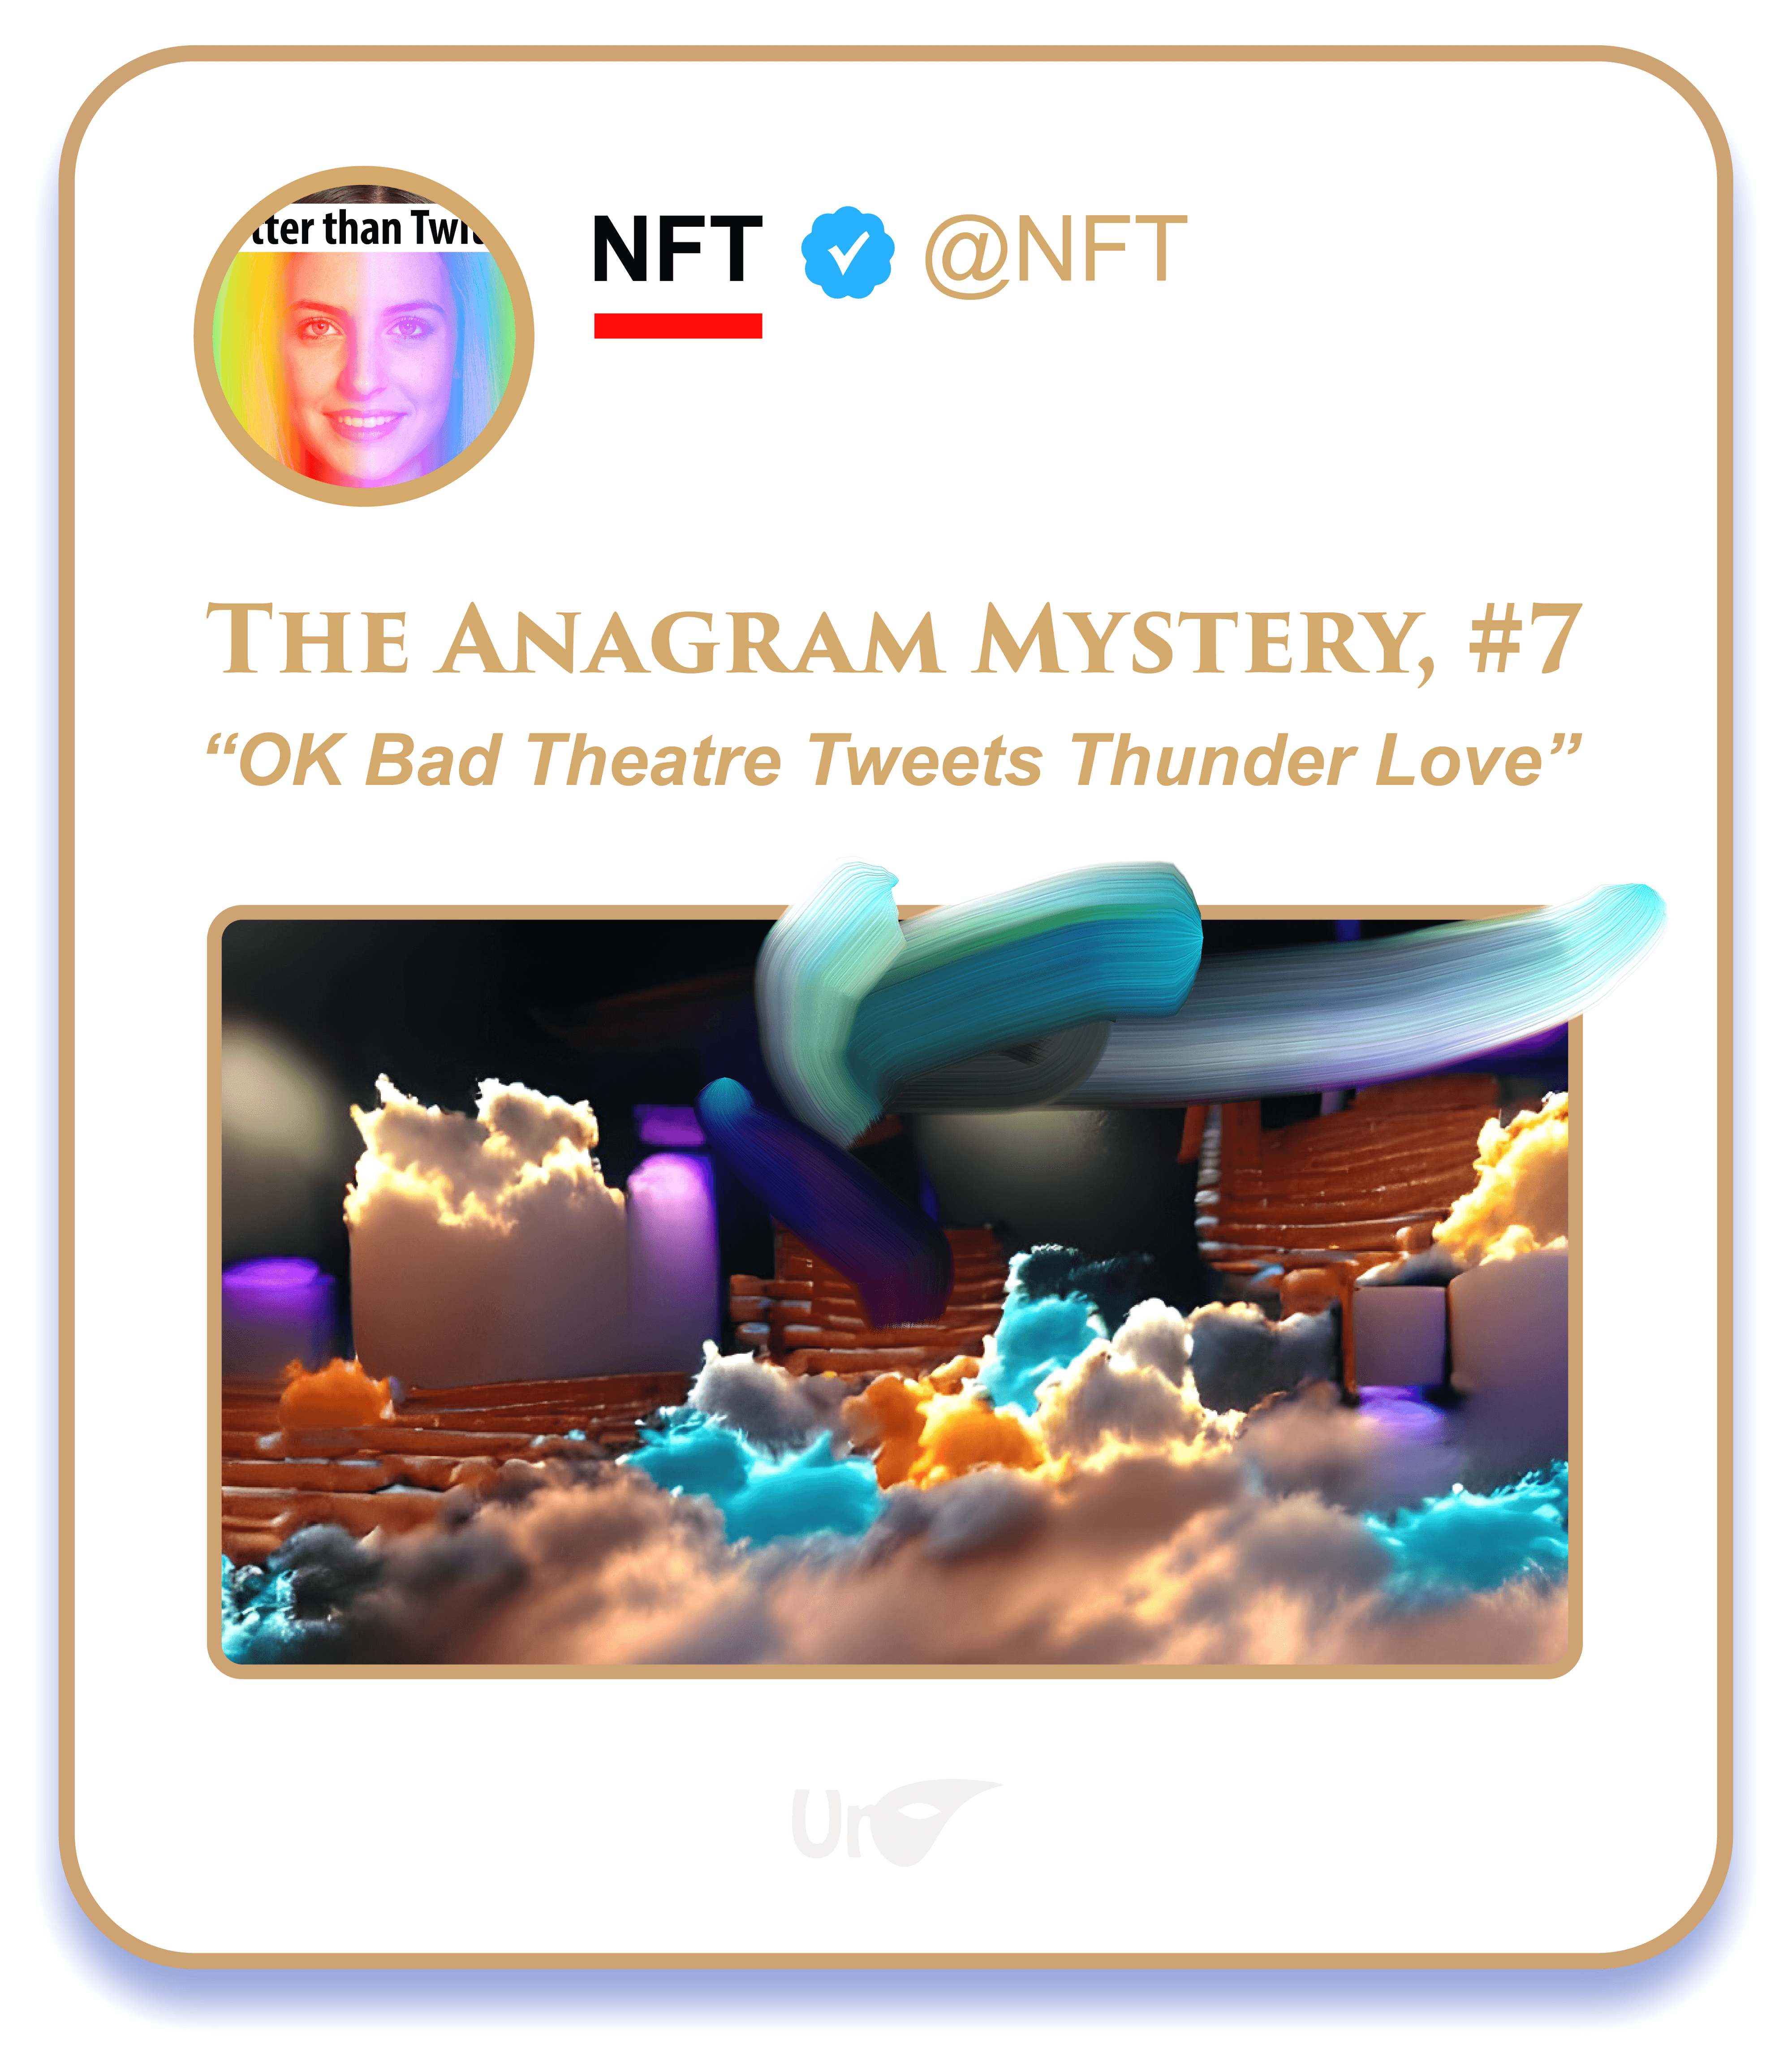 The Anagram Mystery, #7: "OK Bad Theatre Tweets Thunder Love"